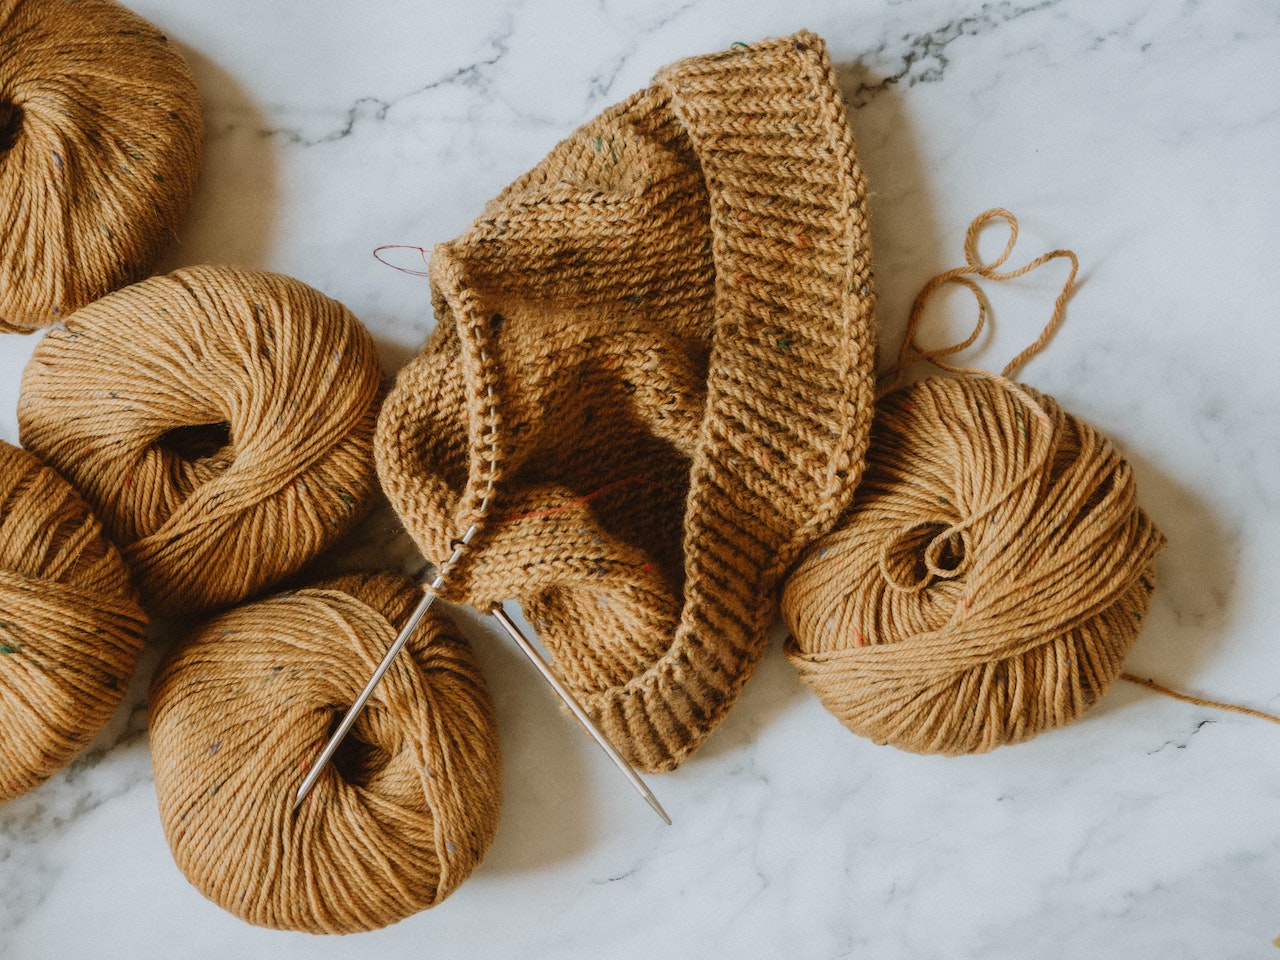 Five balls of wool and an unfinished brown beanie with circular knitting needle